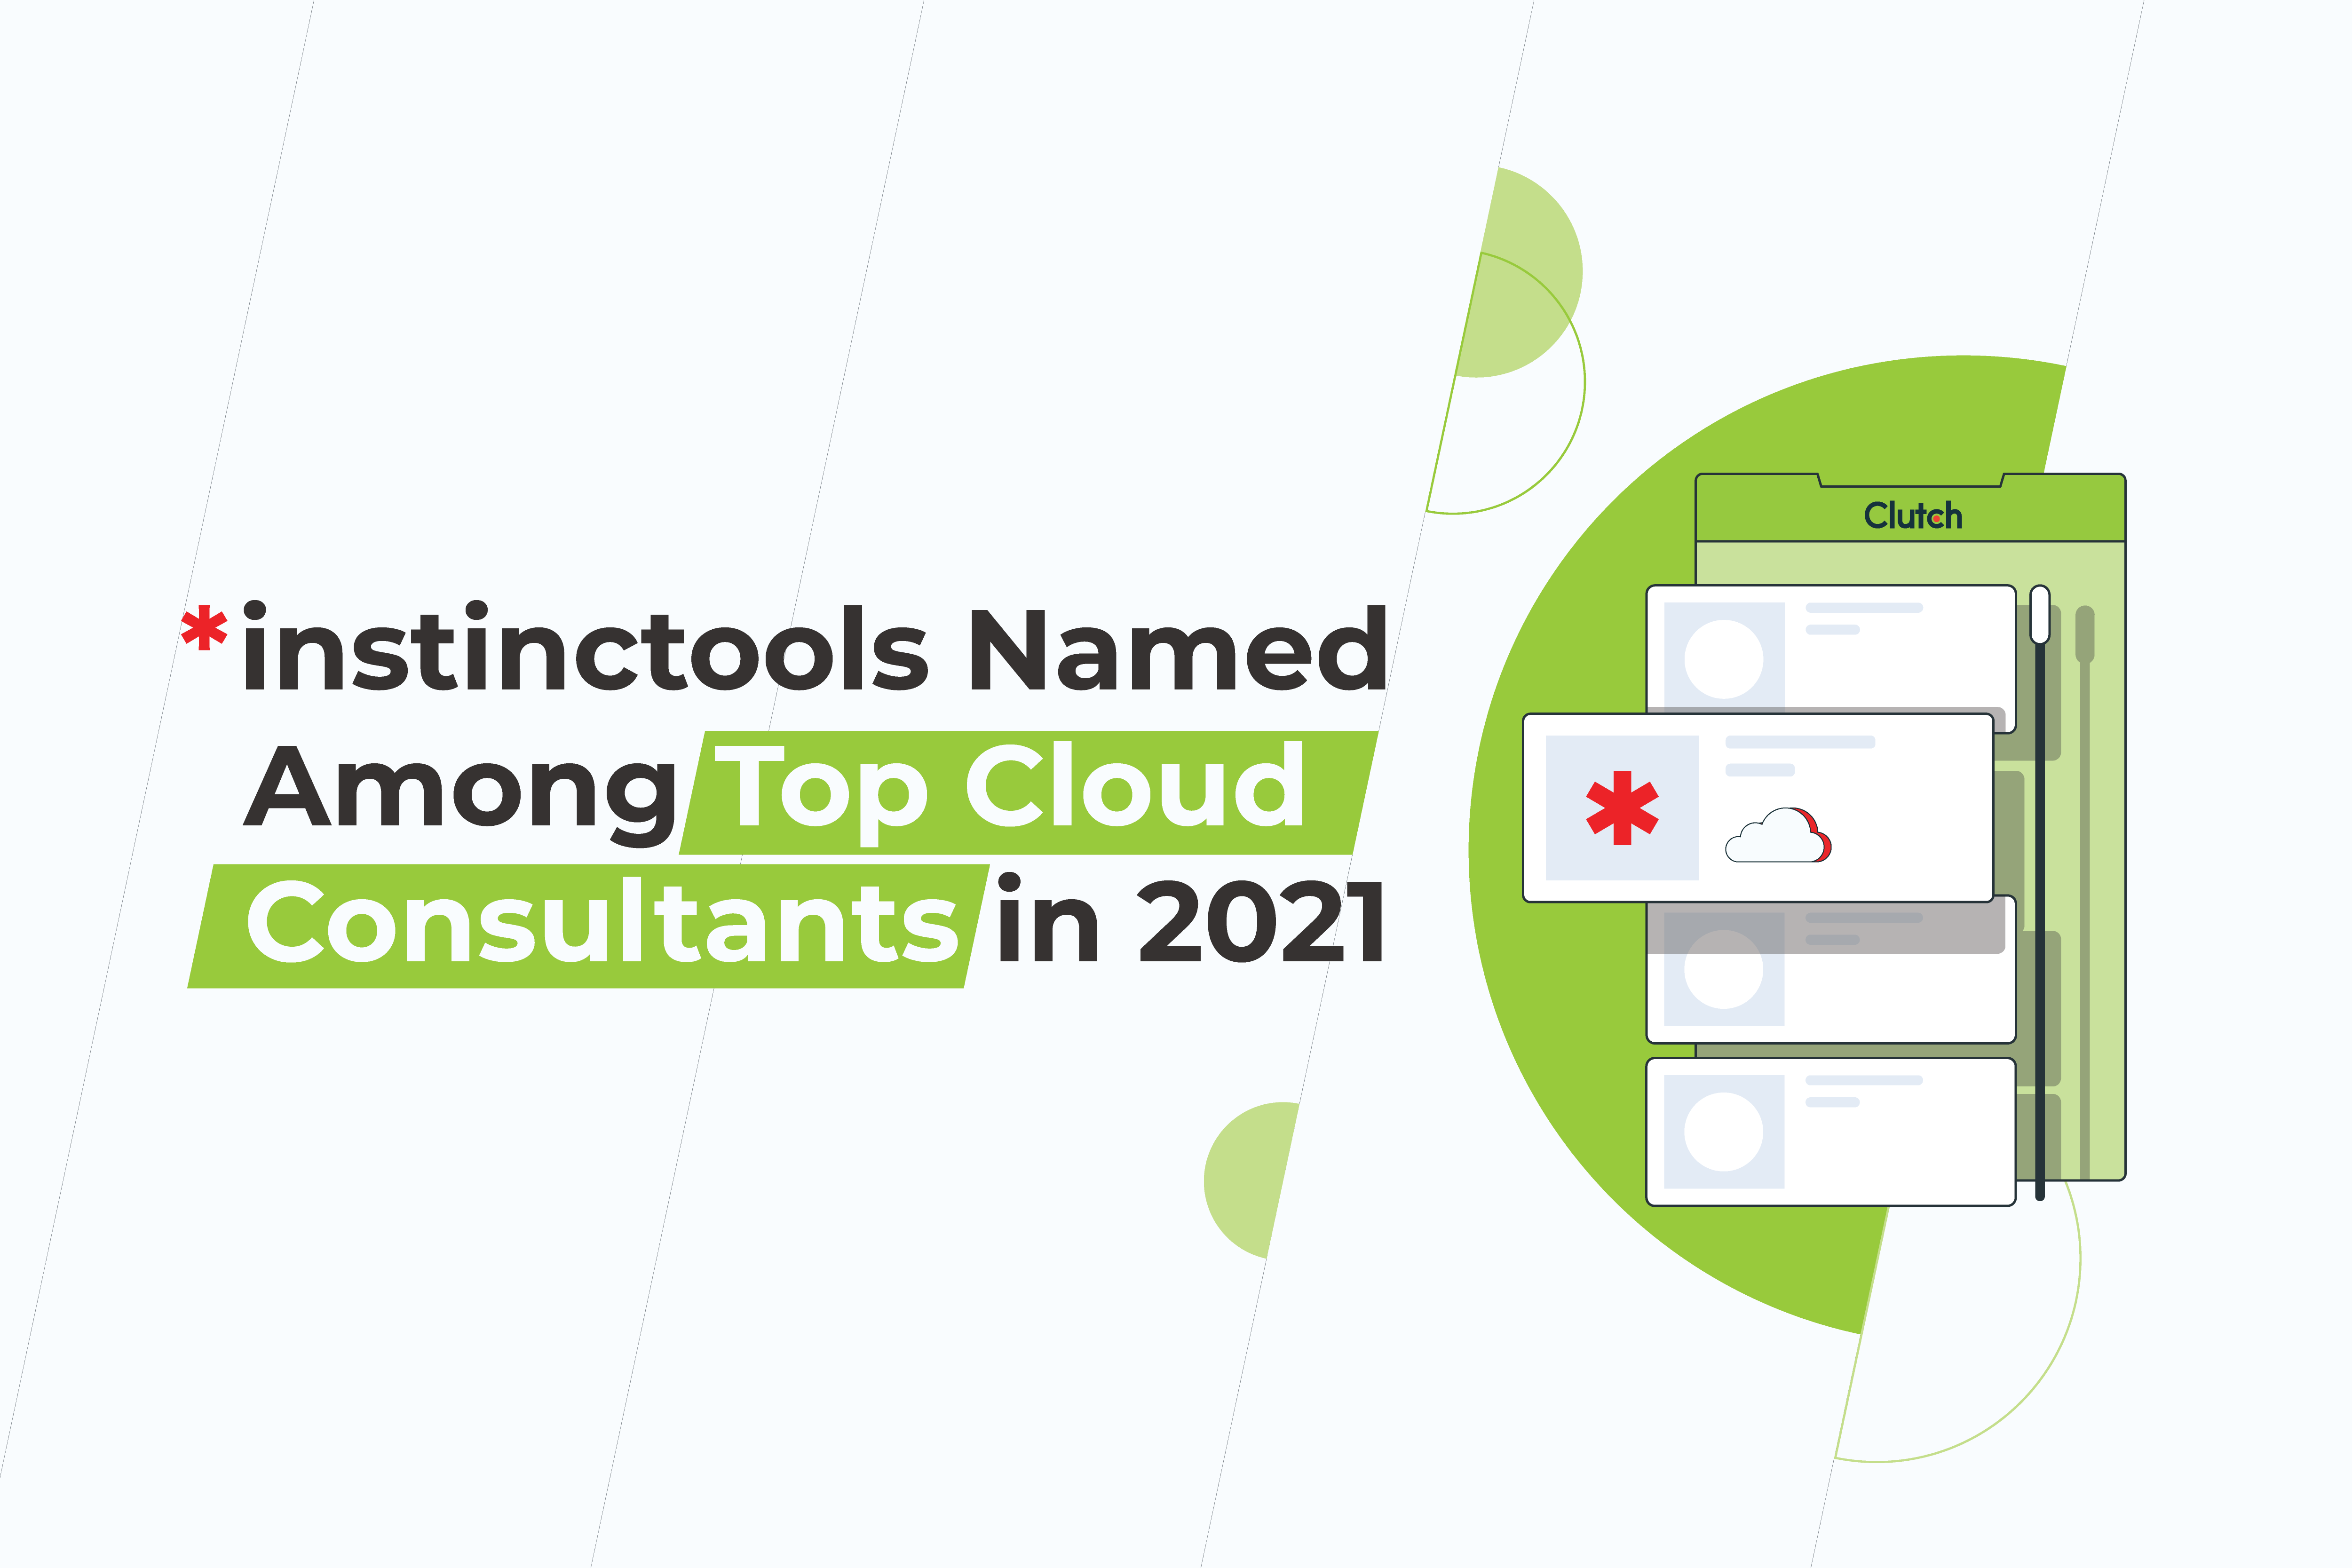 *instinctools Named Among Top Cloud Consultants in 2021